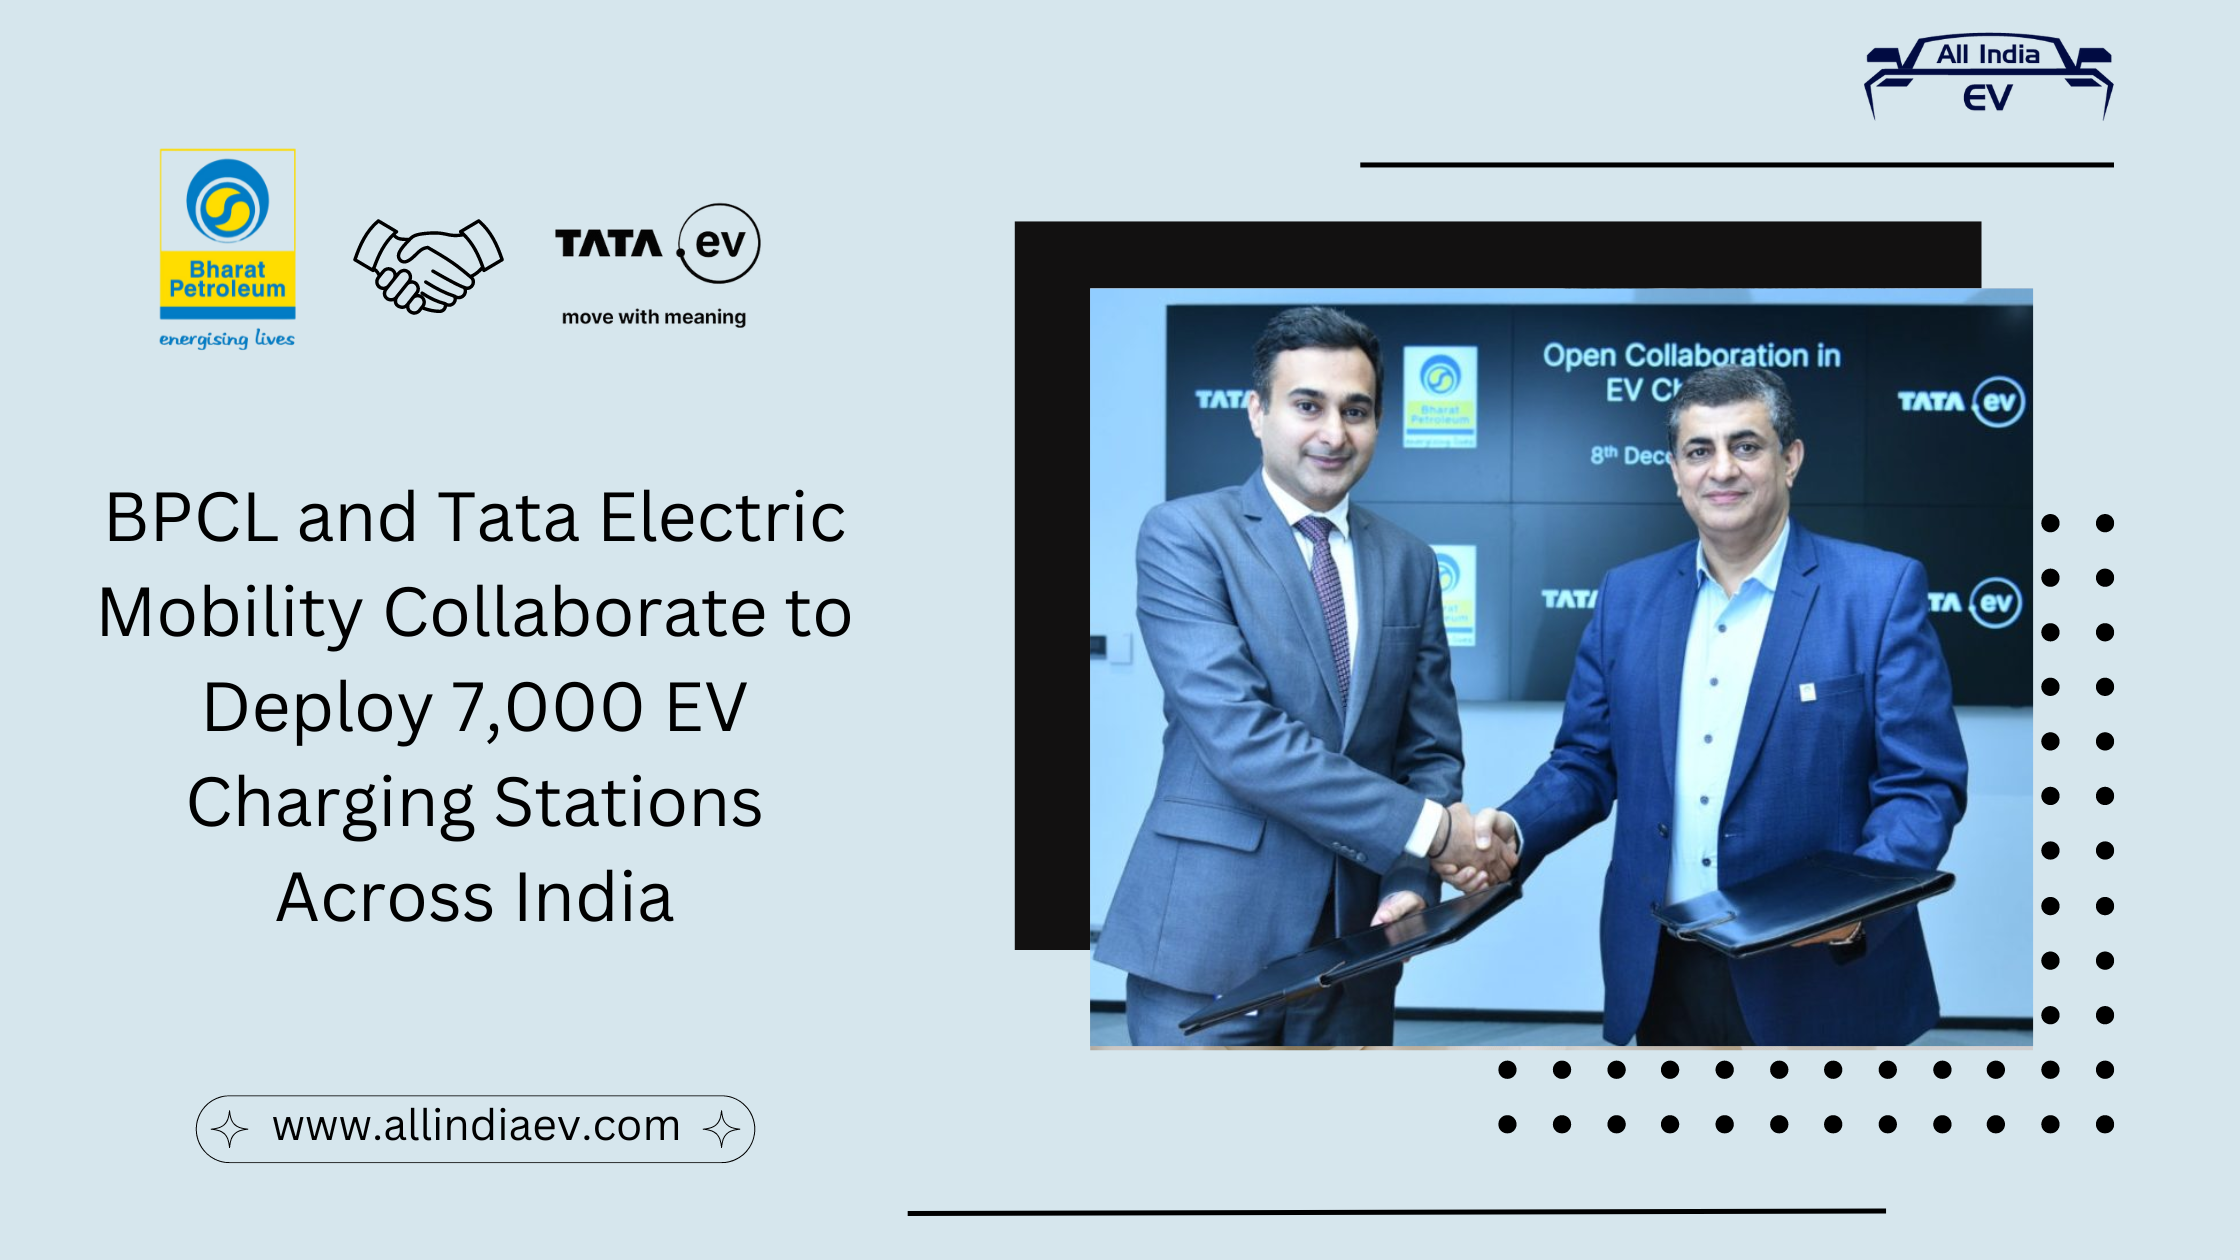 BPCL and Tata Electric Mobility Collaborate to Deploy 7,000 EV Charging Stations Across India